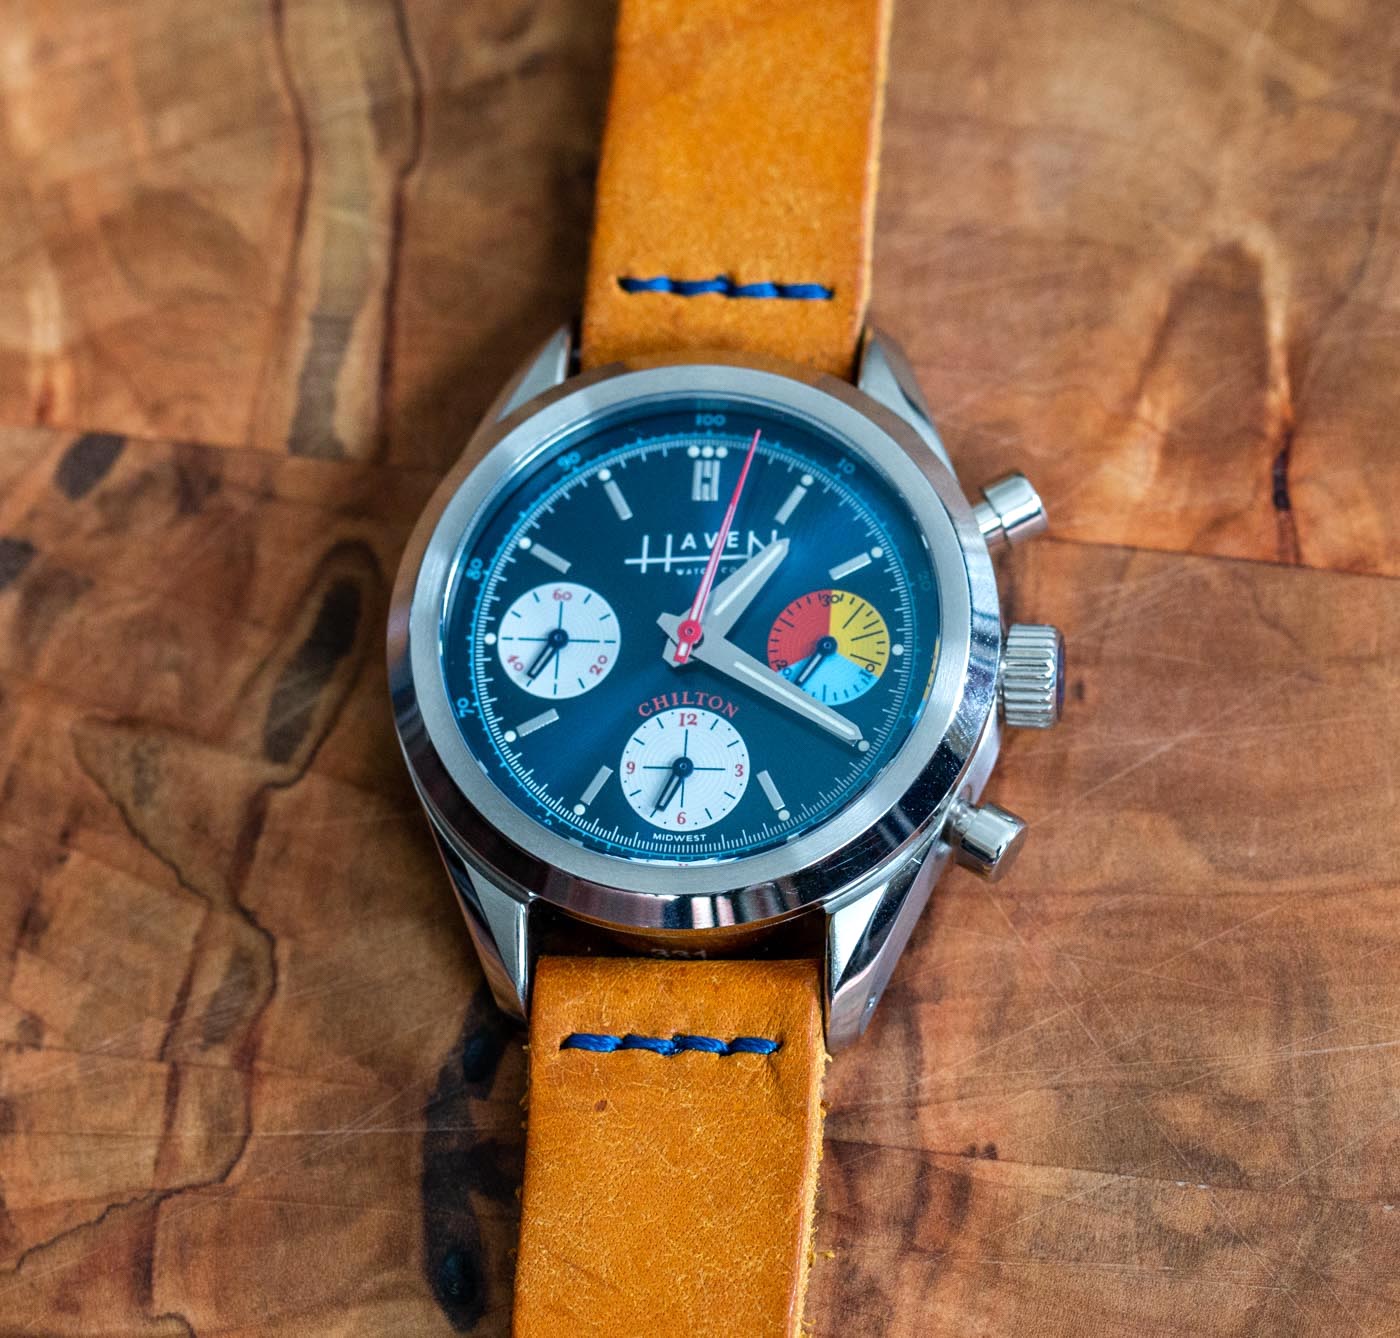 Hands-On: The Haven Chilton Watch Is A Slice Of Grassroots Midwestern Artisanship